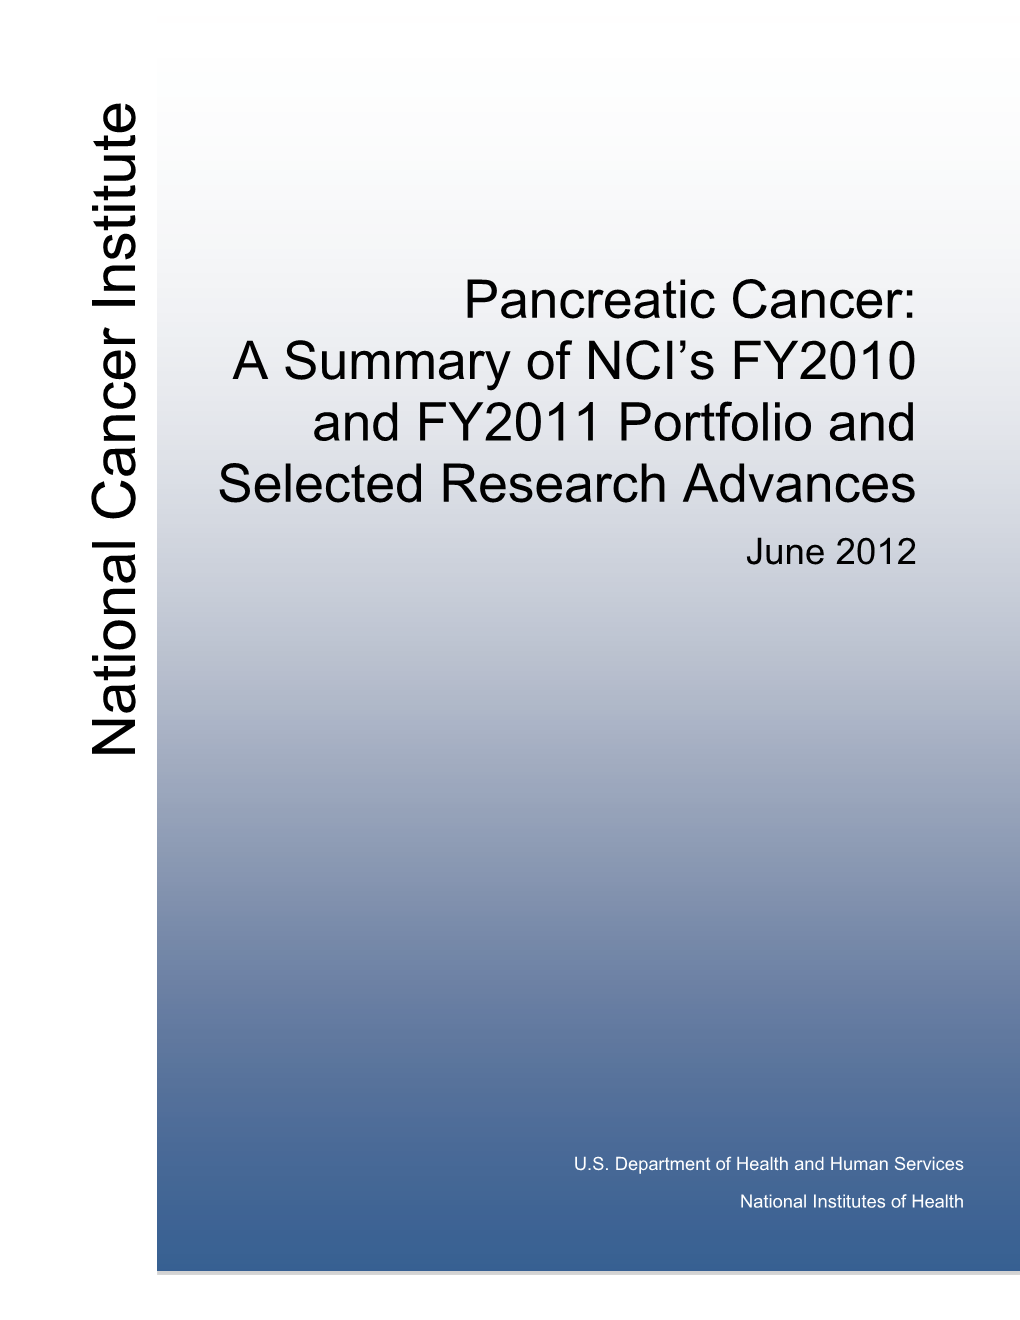 Pancreatic Cancer: a Summary of NCI's FY2010 and FY2011 Portfolio